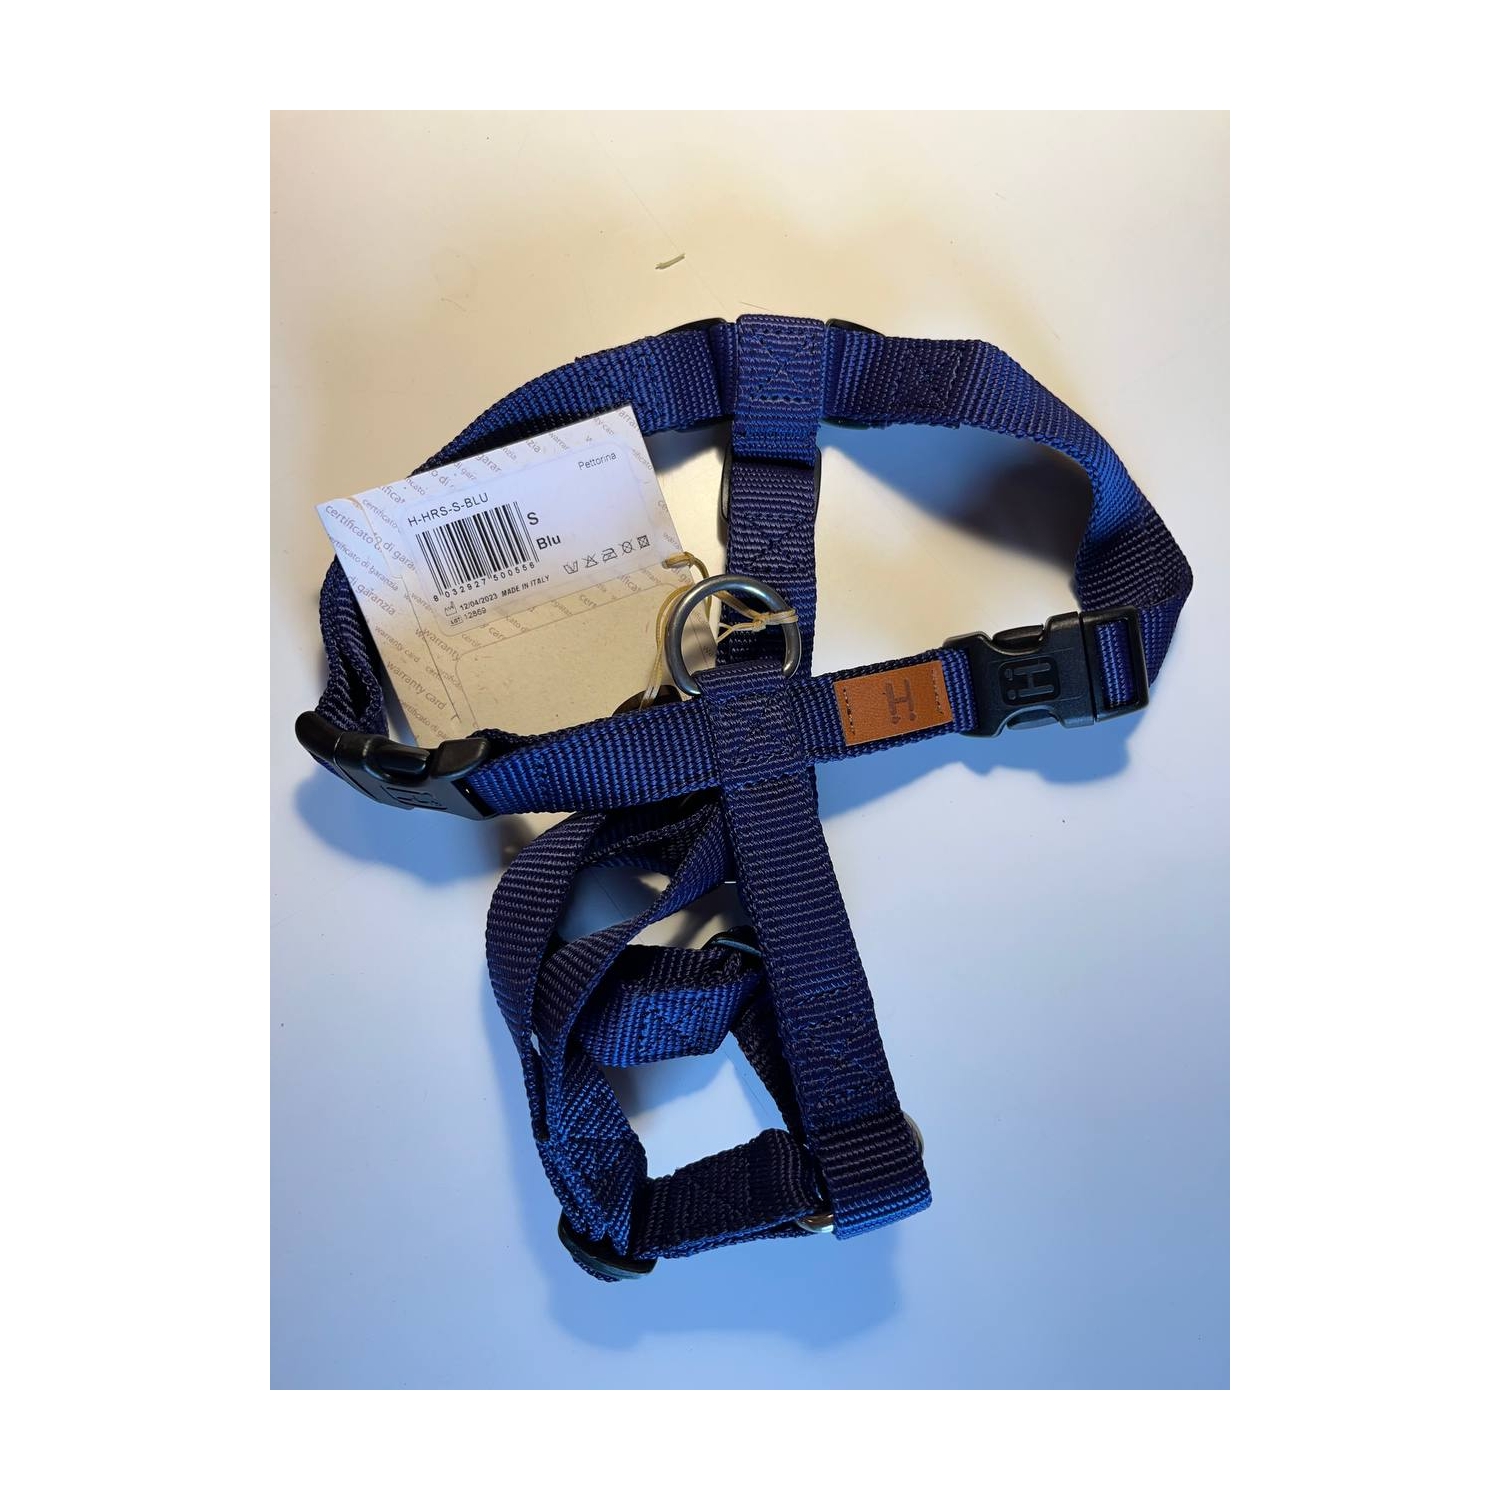 Harness Blu - size S - missing the size label